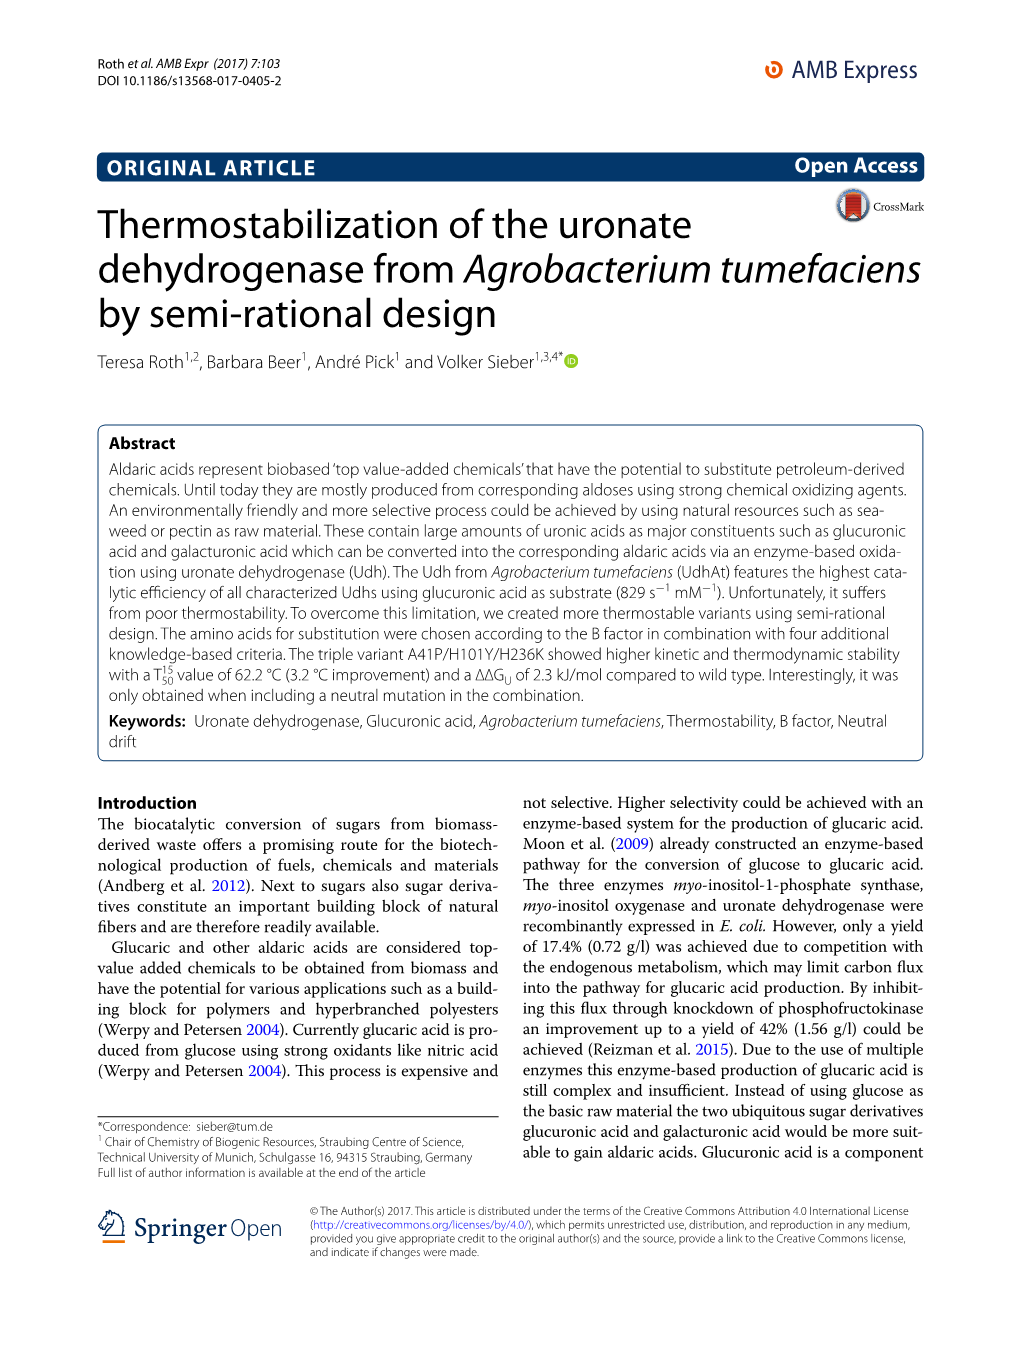 Thermostabilization of the Uronate Dehydrogenase From